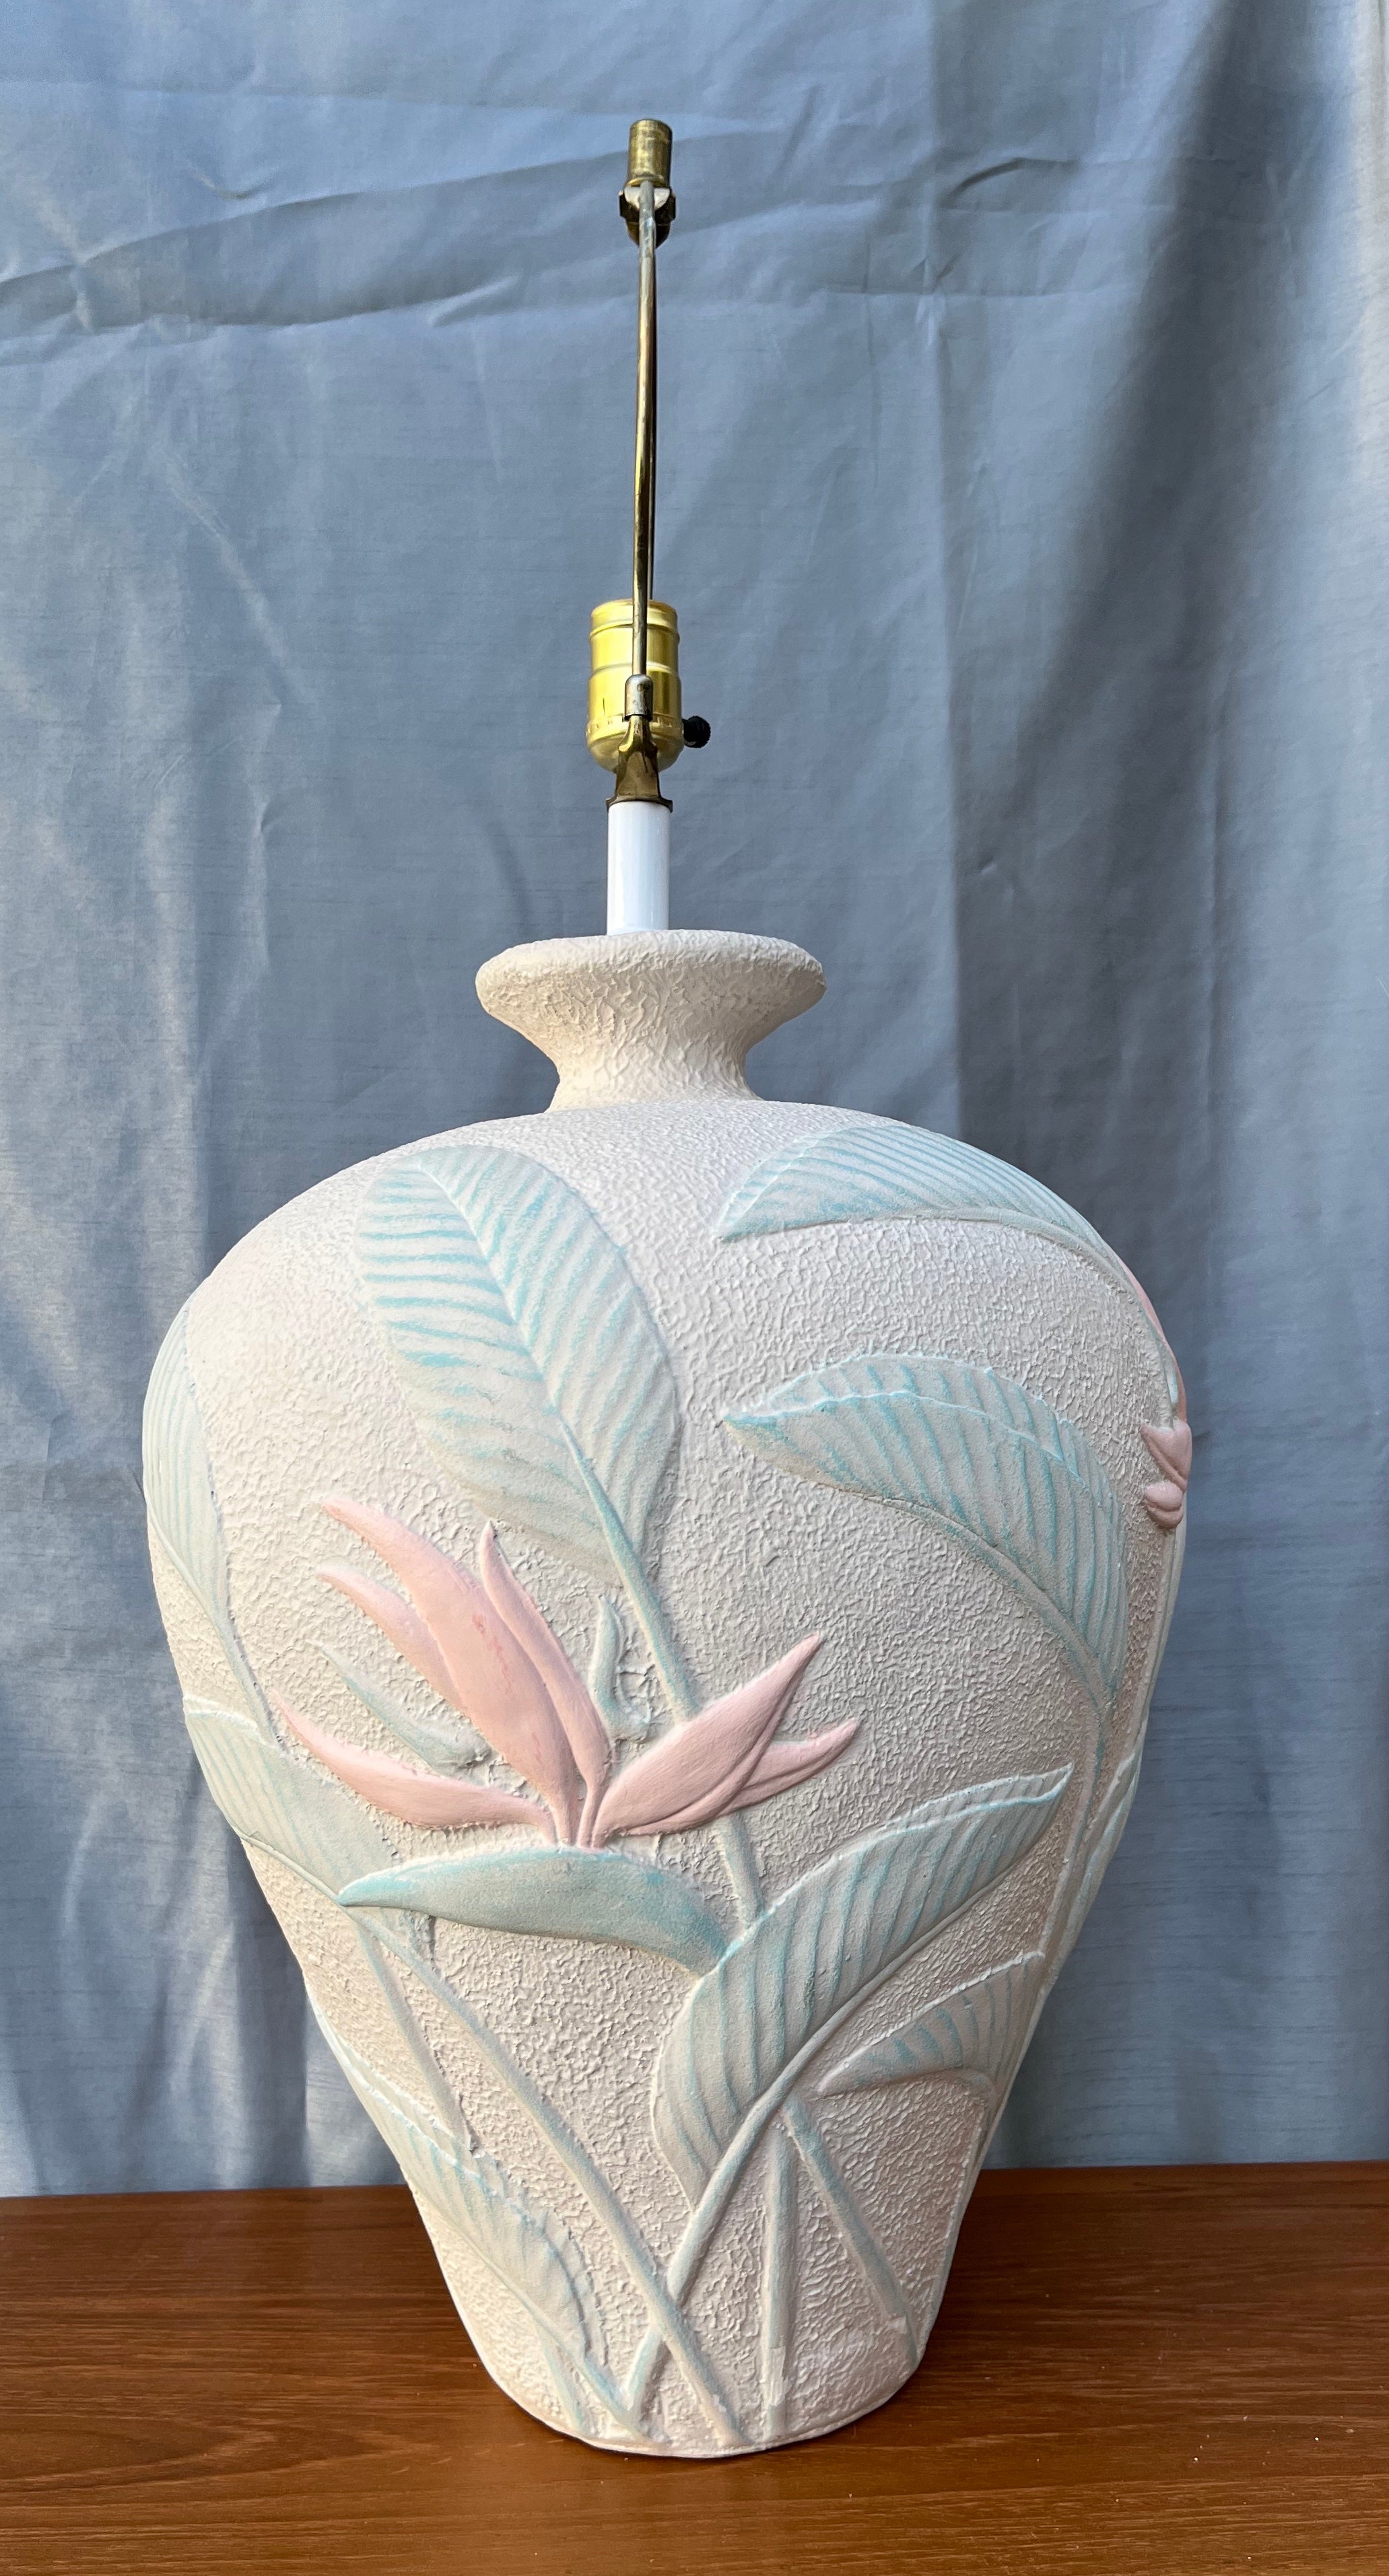 Large Vintage Sculptural Coastal Style Bird of Paradise Table Lamp. Circa 1980s
Features a sculptural urn-shaped textured plaster body with Paradise Flower reliefs highlighted with a soft pastel colors
In Excellent Near Mint Original Condition With